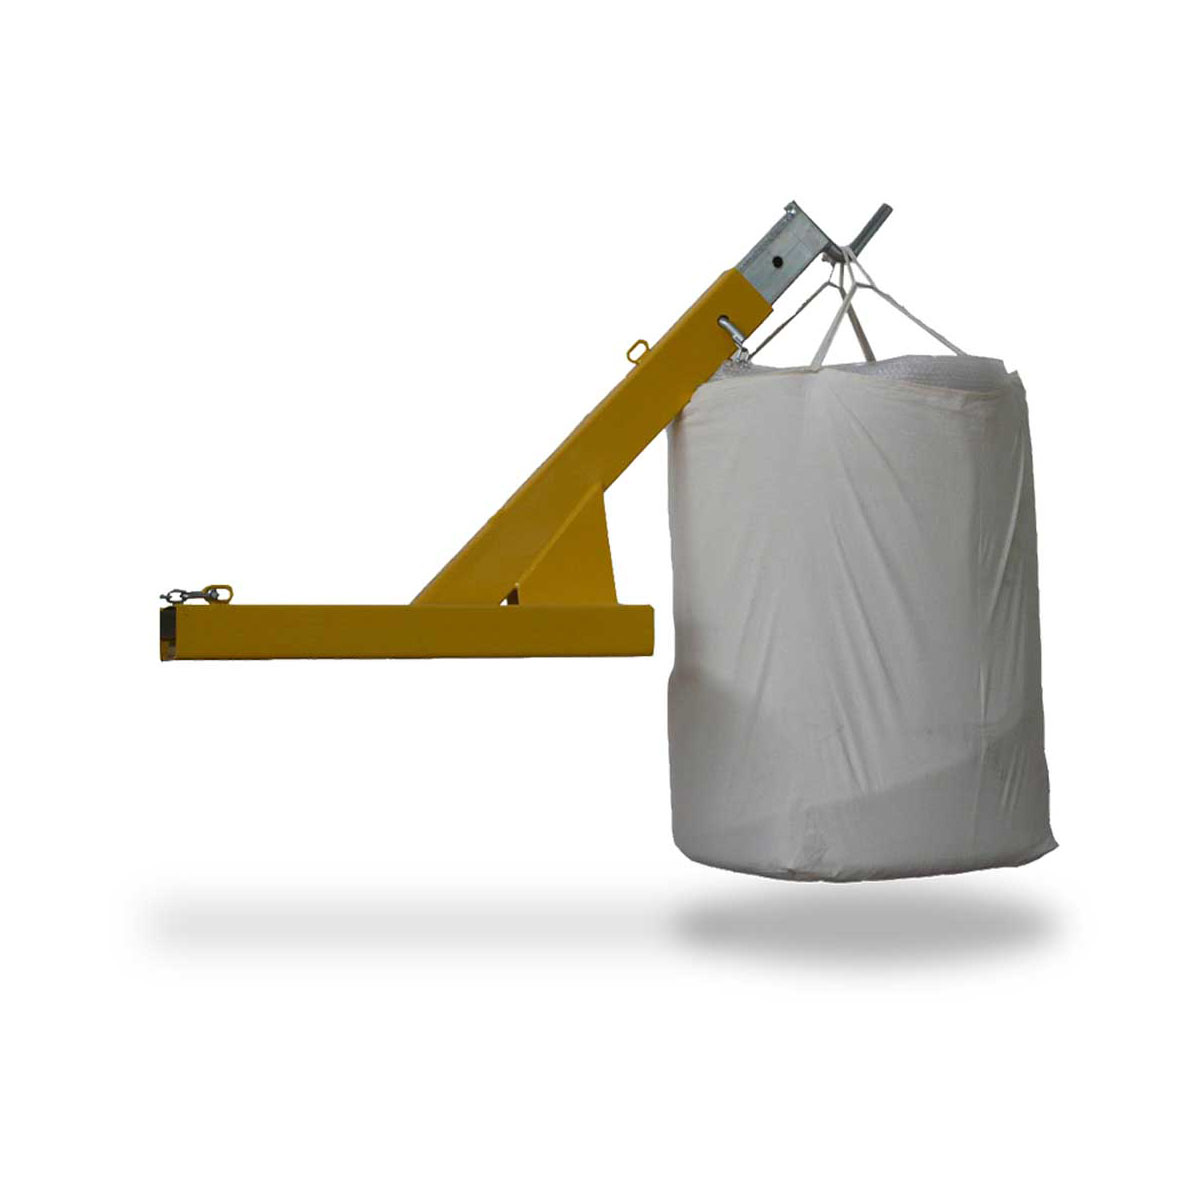 Buy Bulk Bag Lifter  in Forklift Attachments from Astrolift NZ